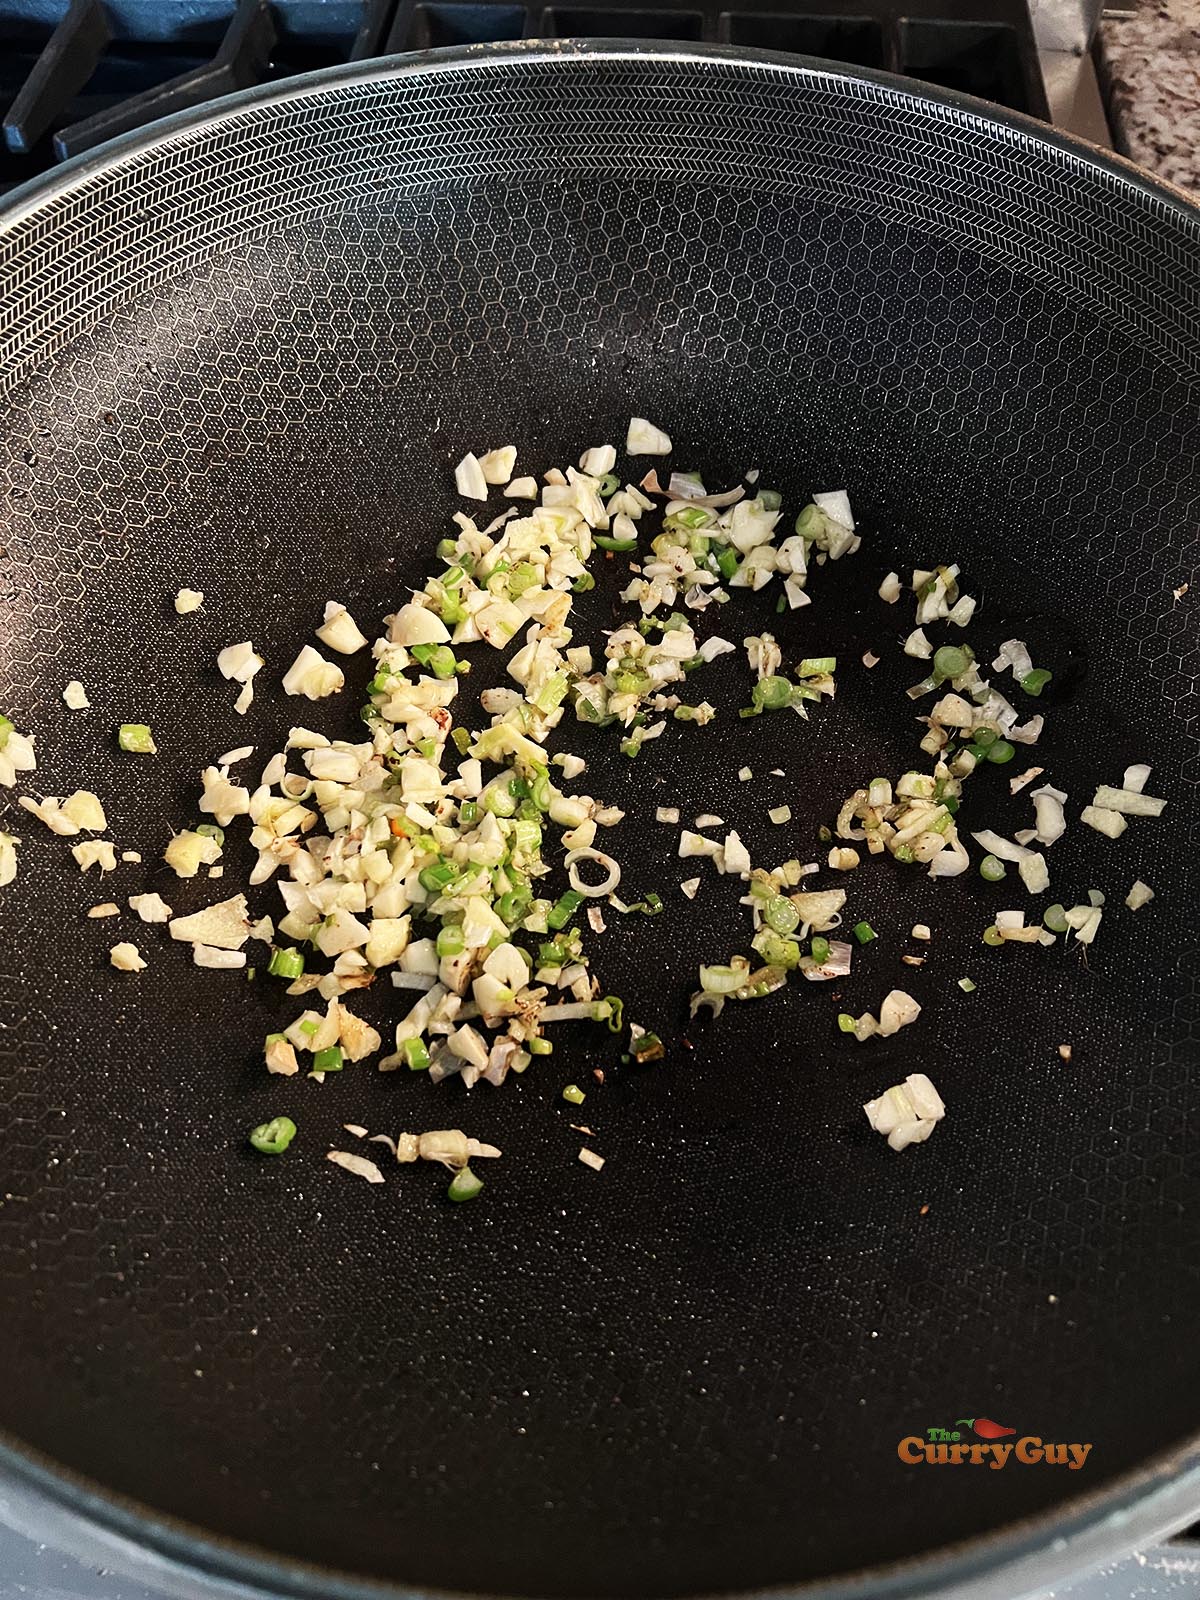 Frying the chopped garlic, ginger and spring onions (scallions) in a hot wok.